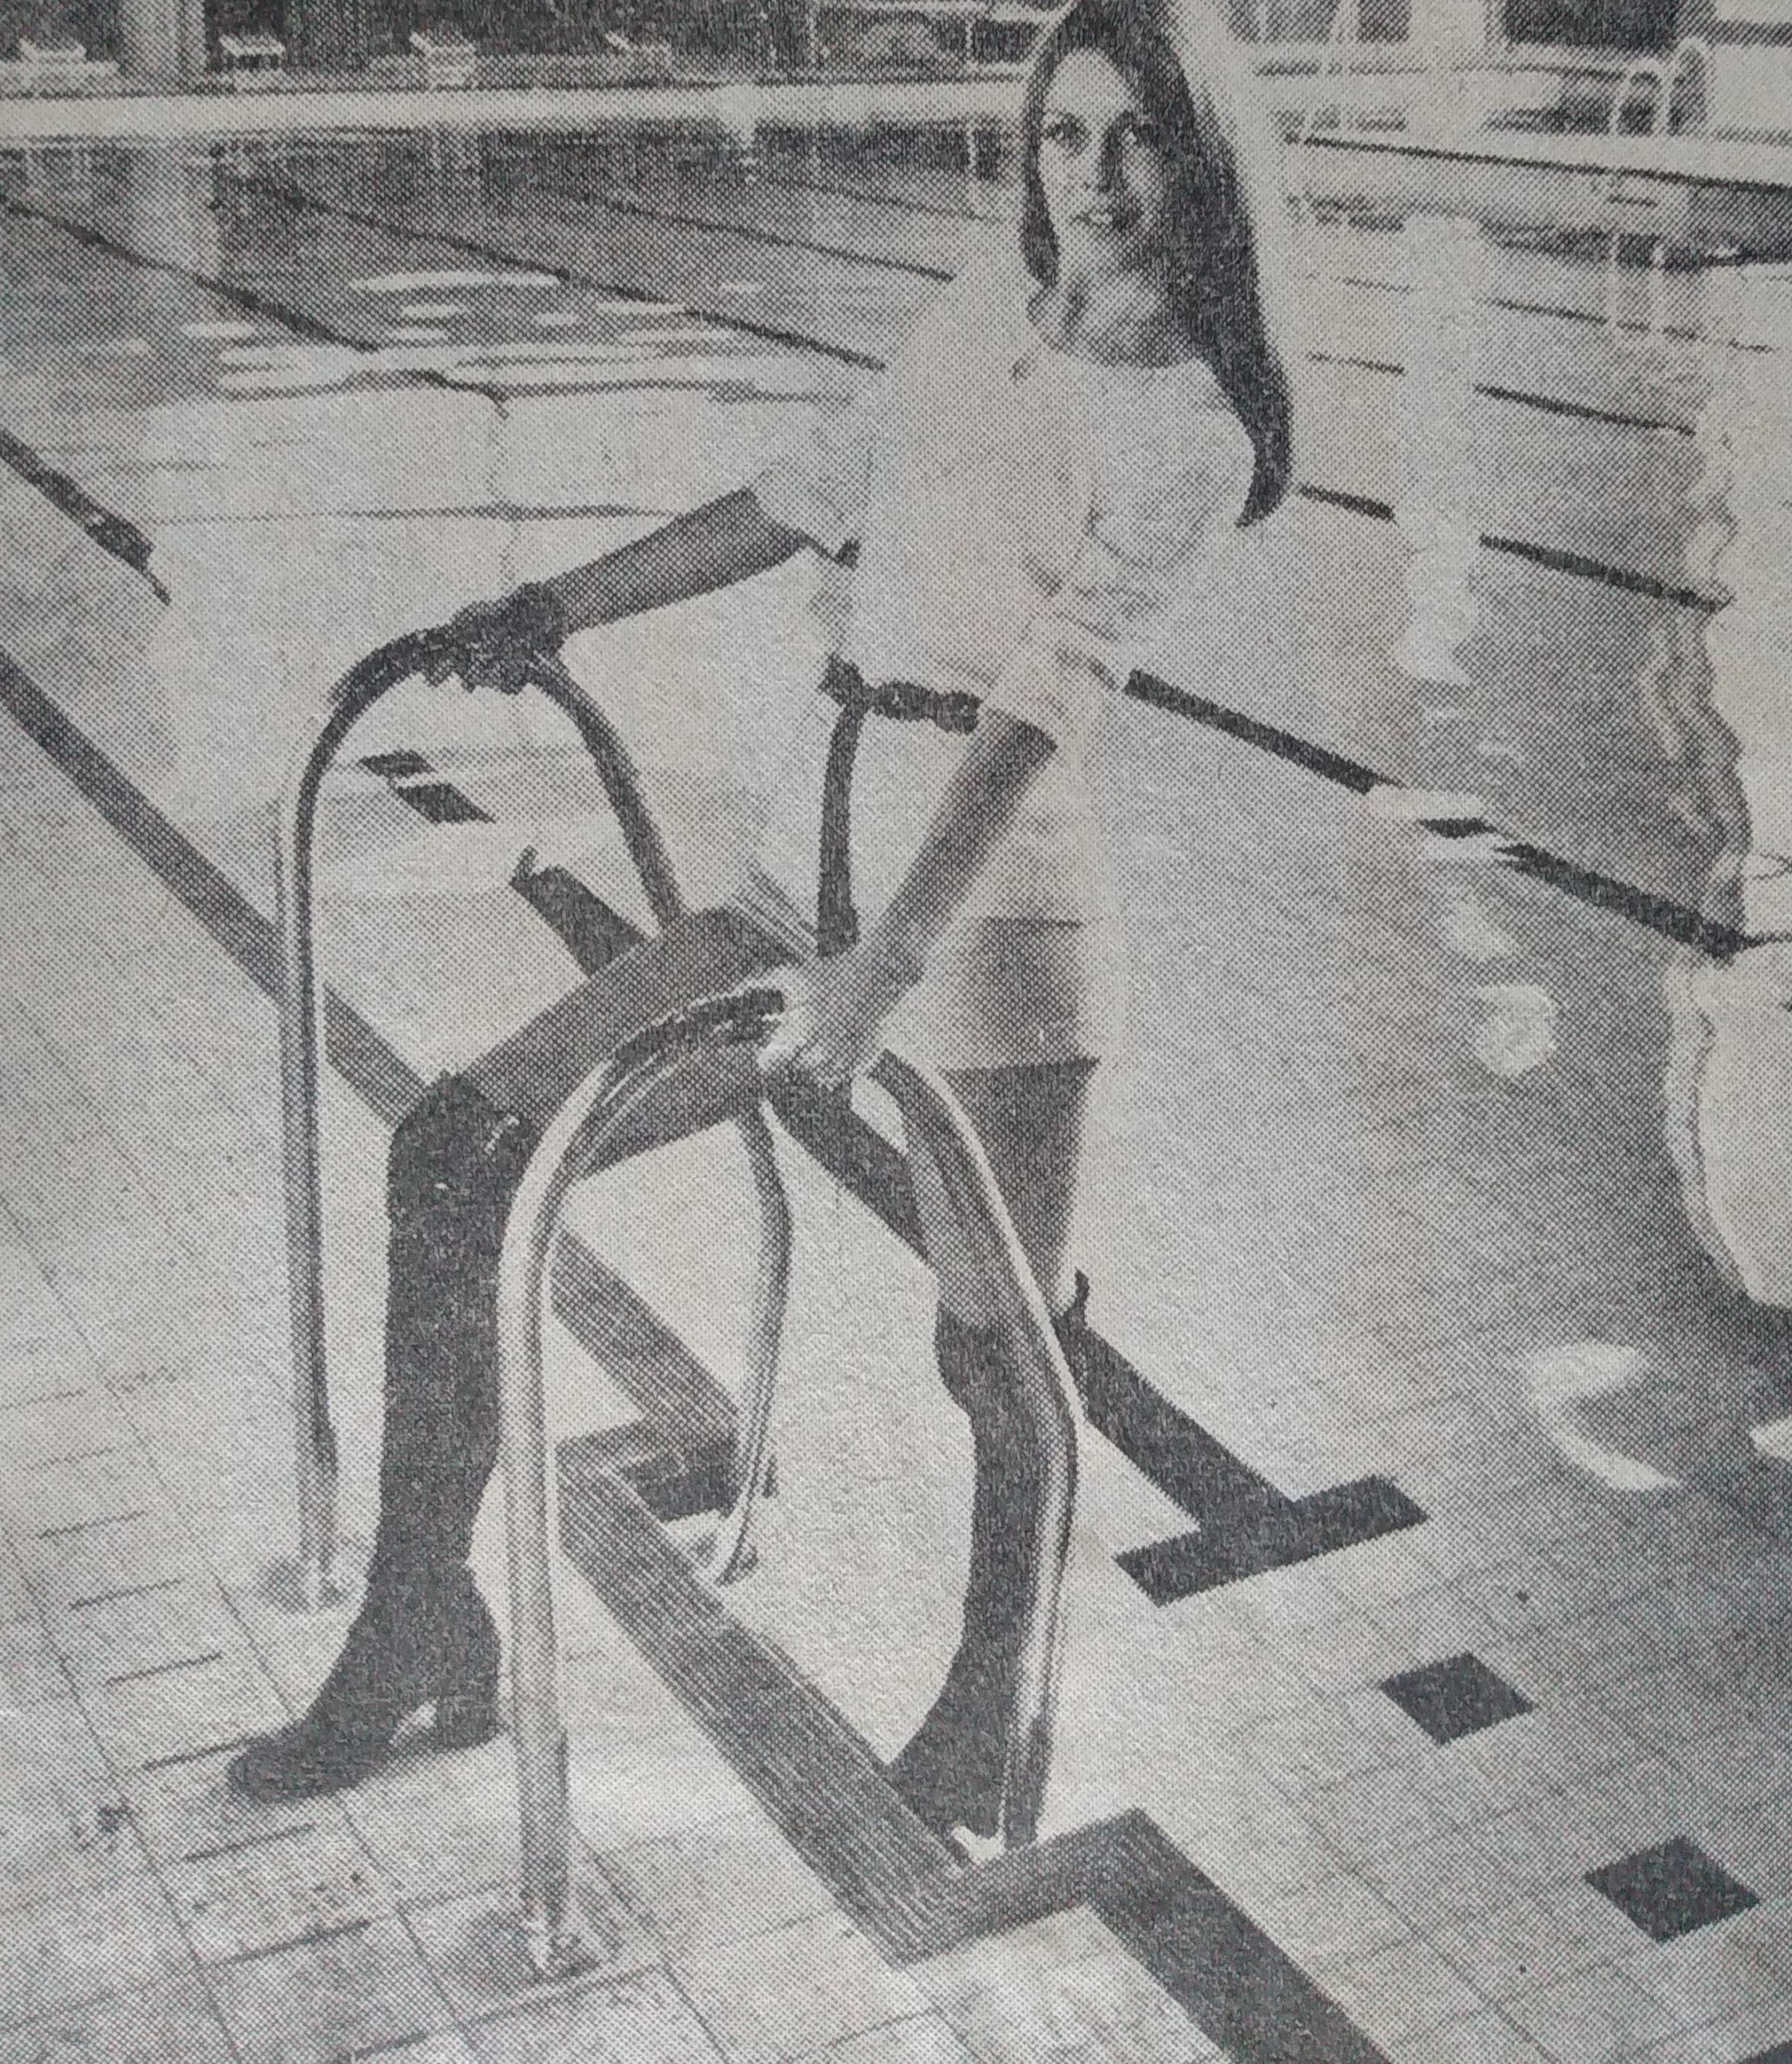 Worcester Carnival Queen Julianna Tongue was given a sneak preview of the new pool in March 1972 before its official opening